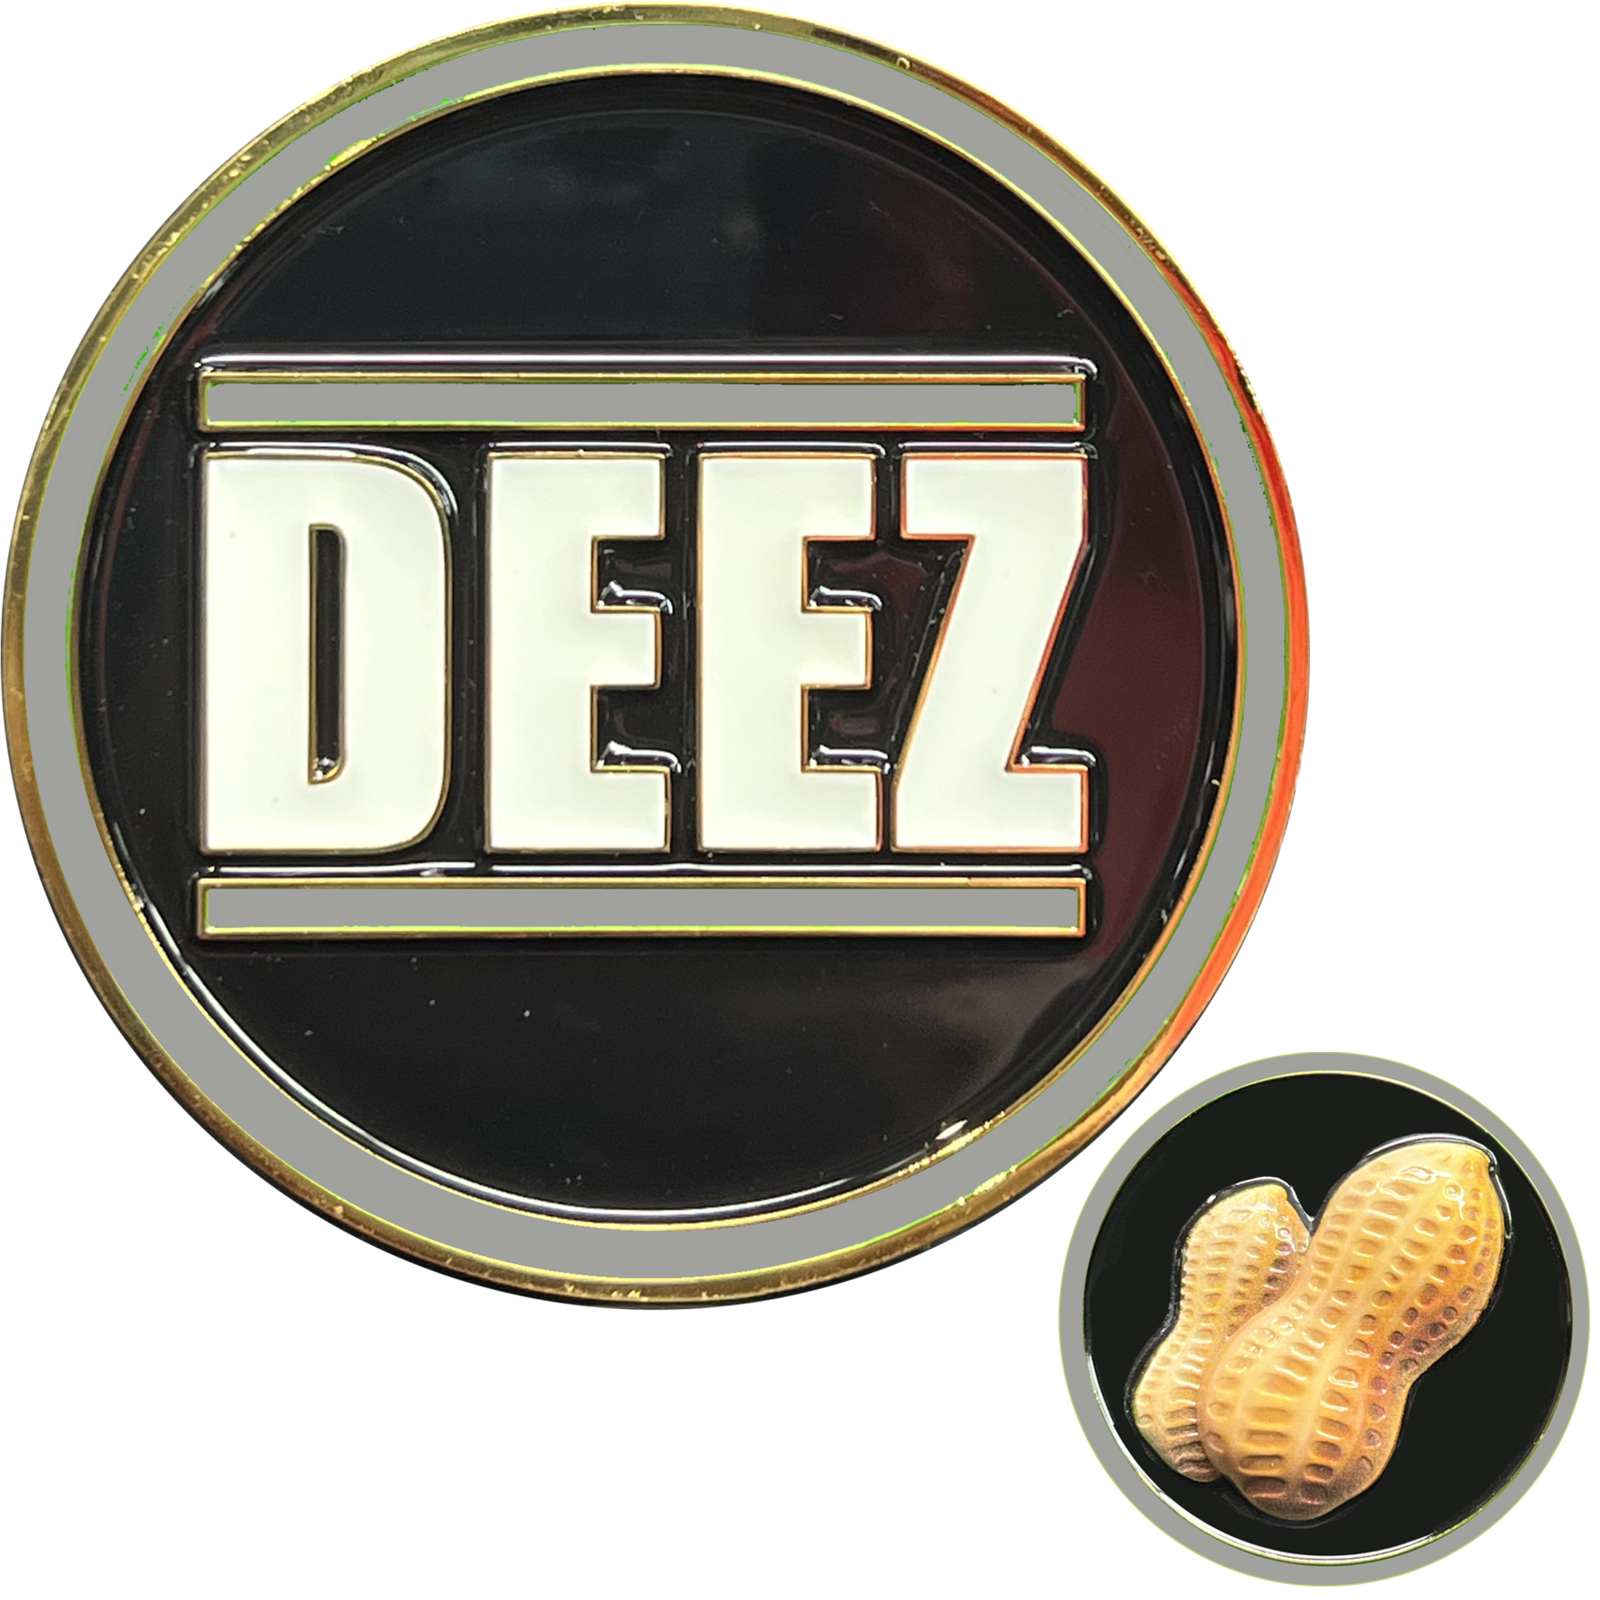 deez nuts crypto coin